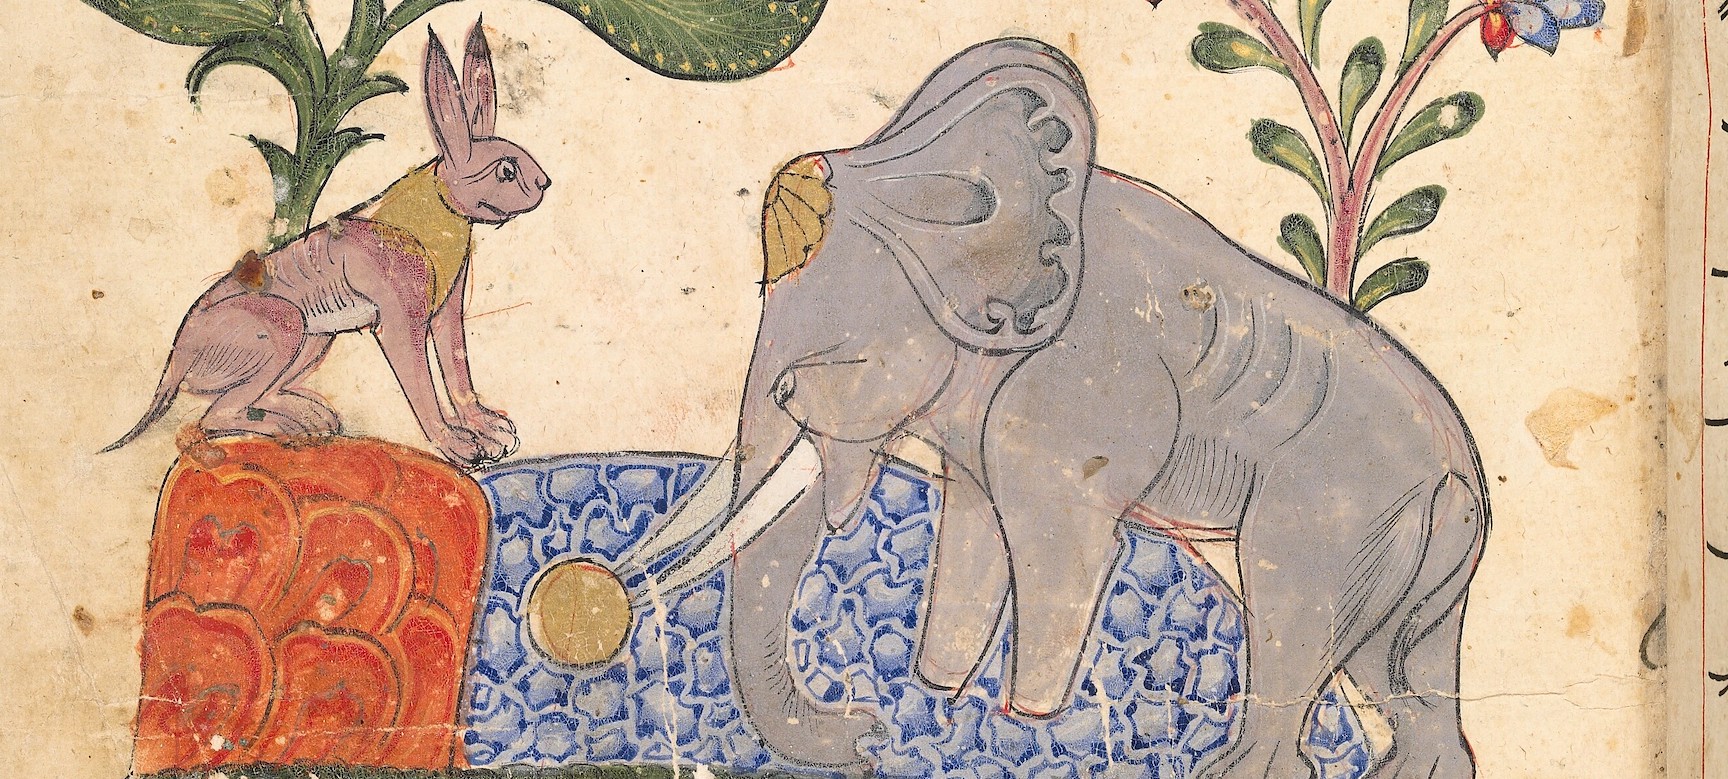 A painted image from a manuscript depicting a rabbit and an elephant in bright colours